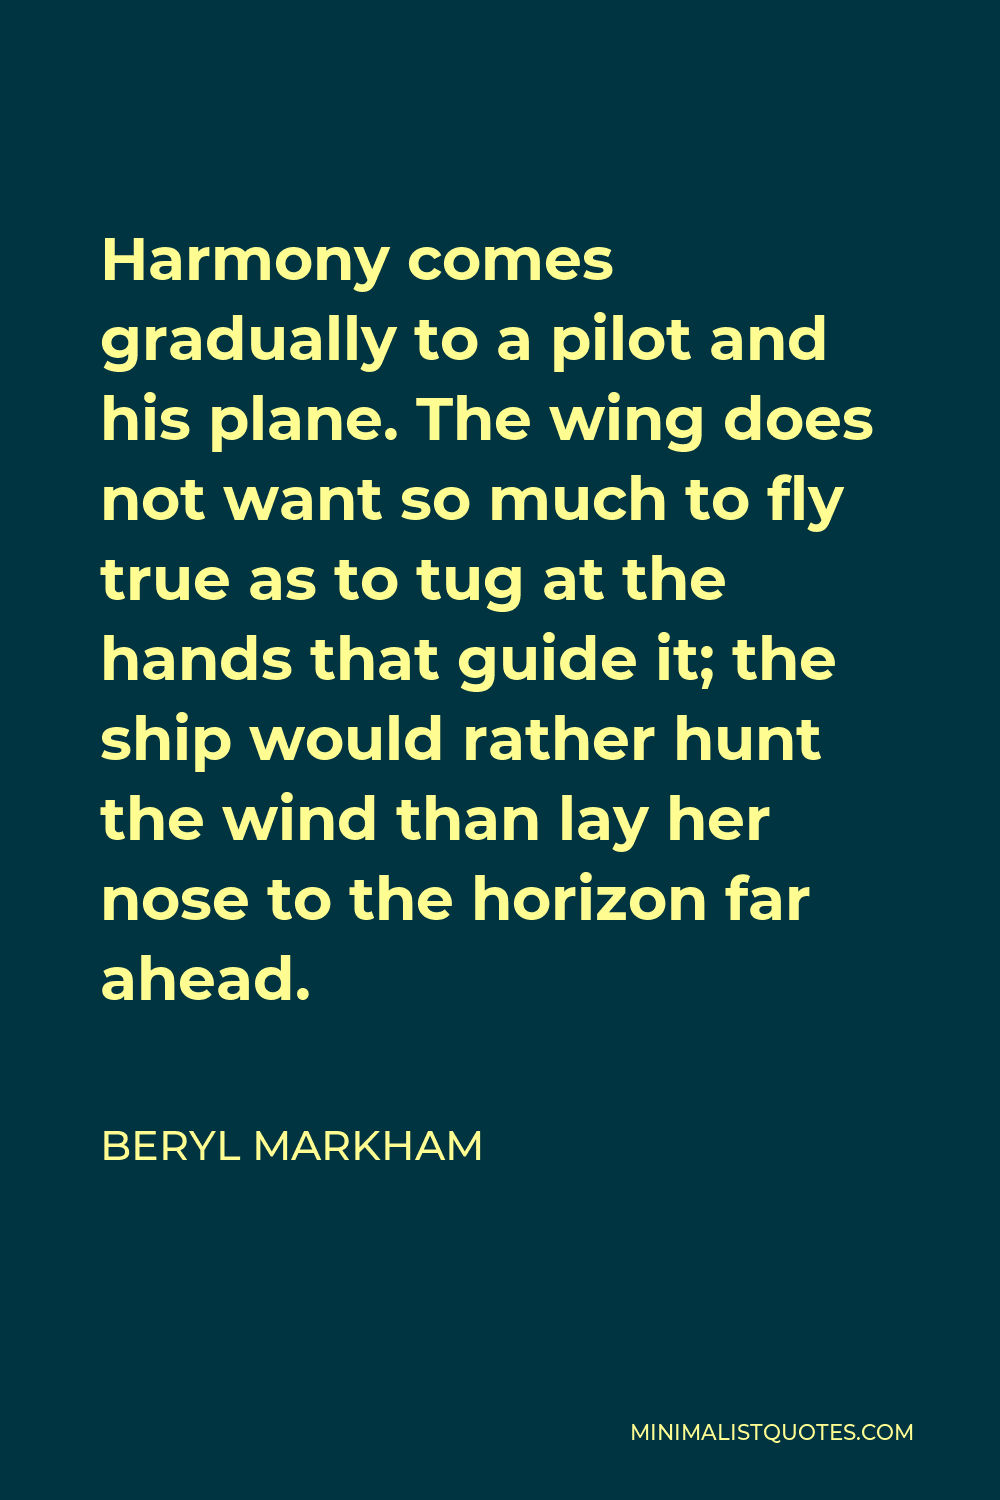 Beryl Markham Quote - Harmony comes gradually to a pilot and his plane. The wing does not want so much to fly true as to tug at the hands that guide it; the ship would rather hunt the wind than lay her nose to the horizon far ahead.